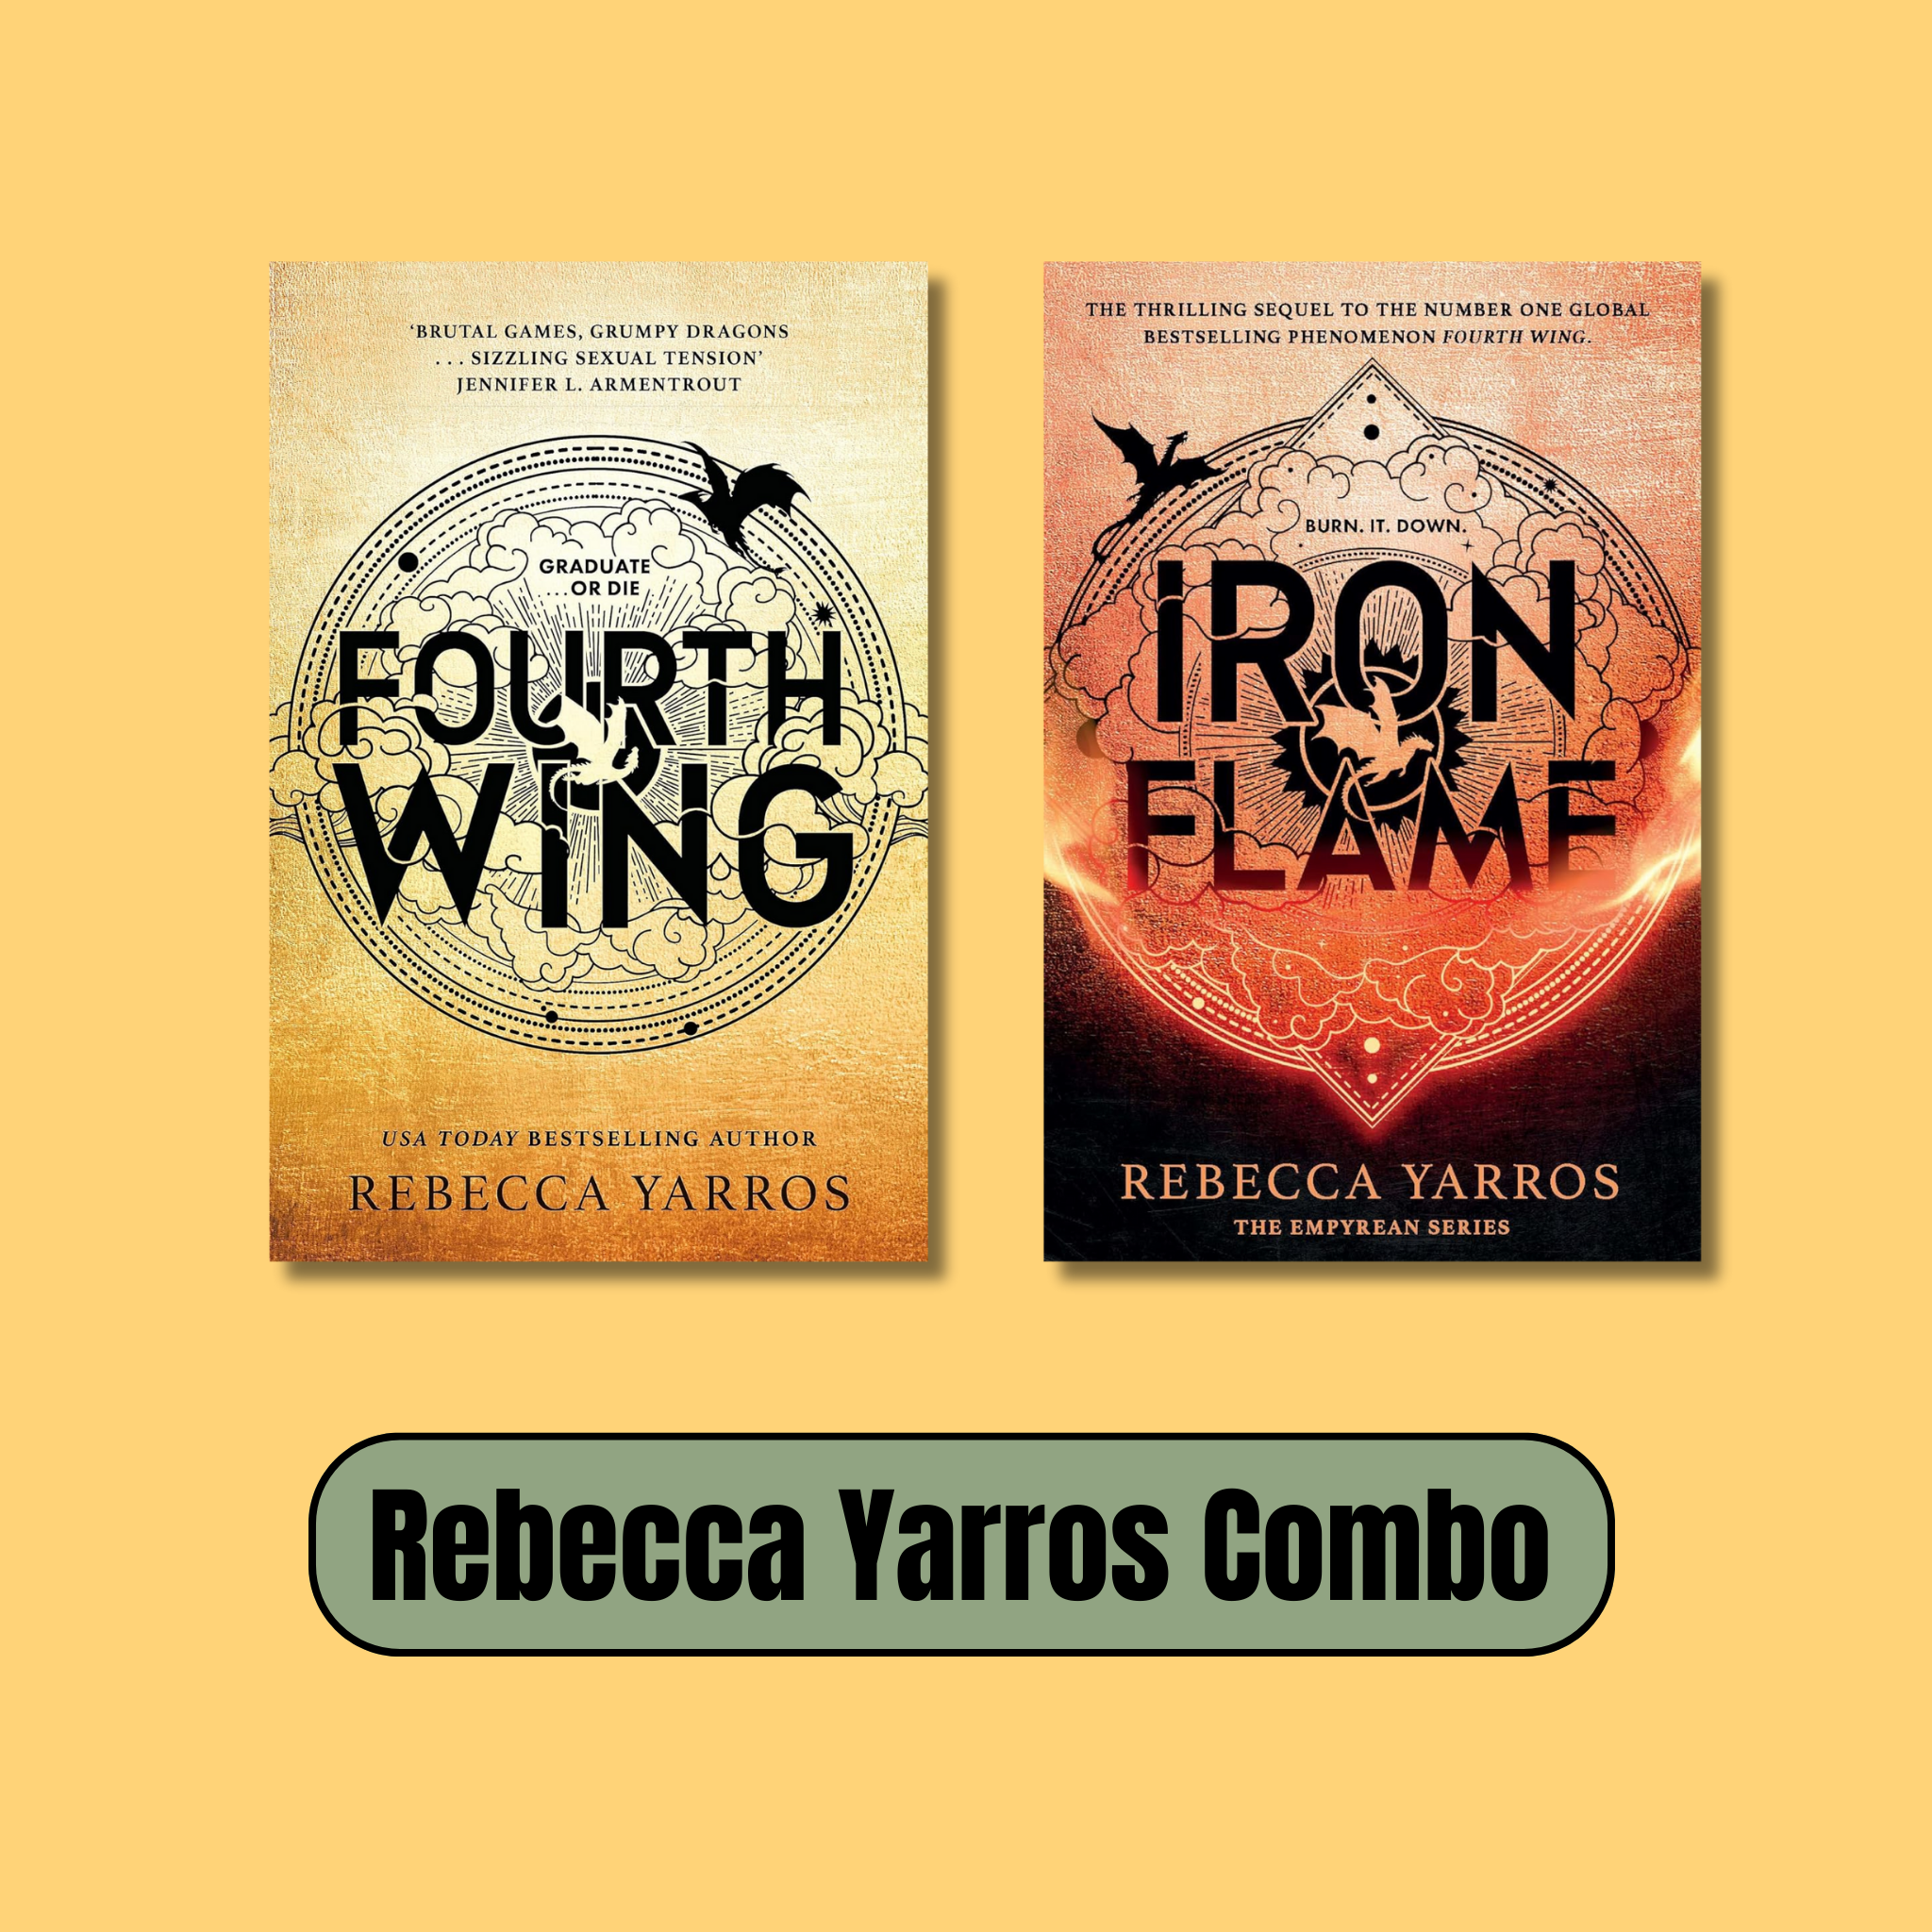 Iron Flame by Rebecca Yarros Review-Dragons, Resilience, and Romance